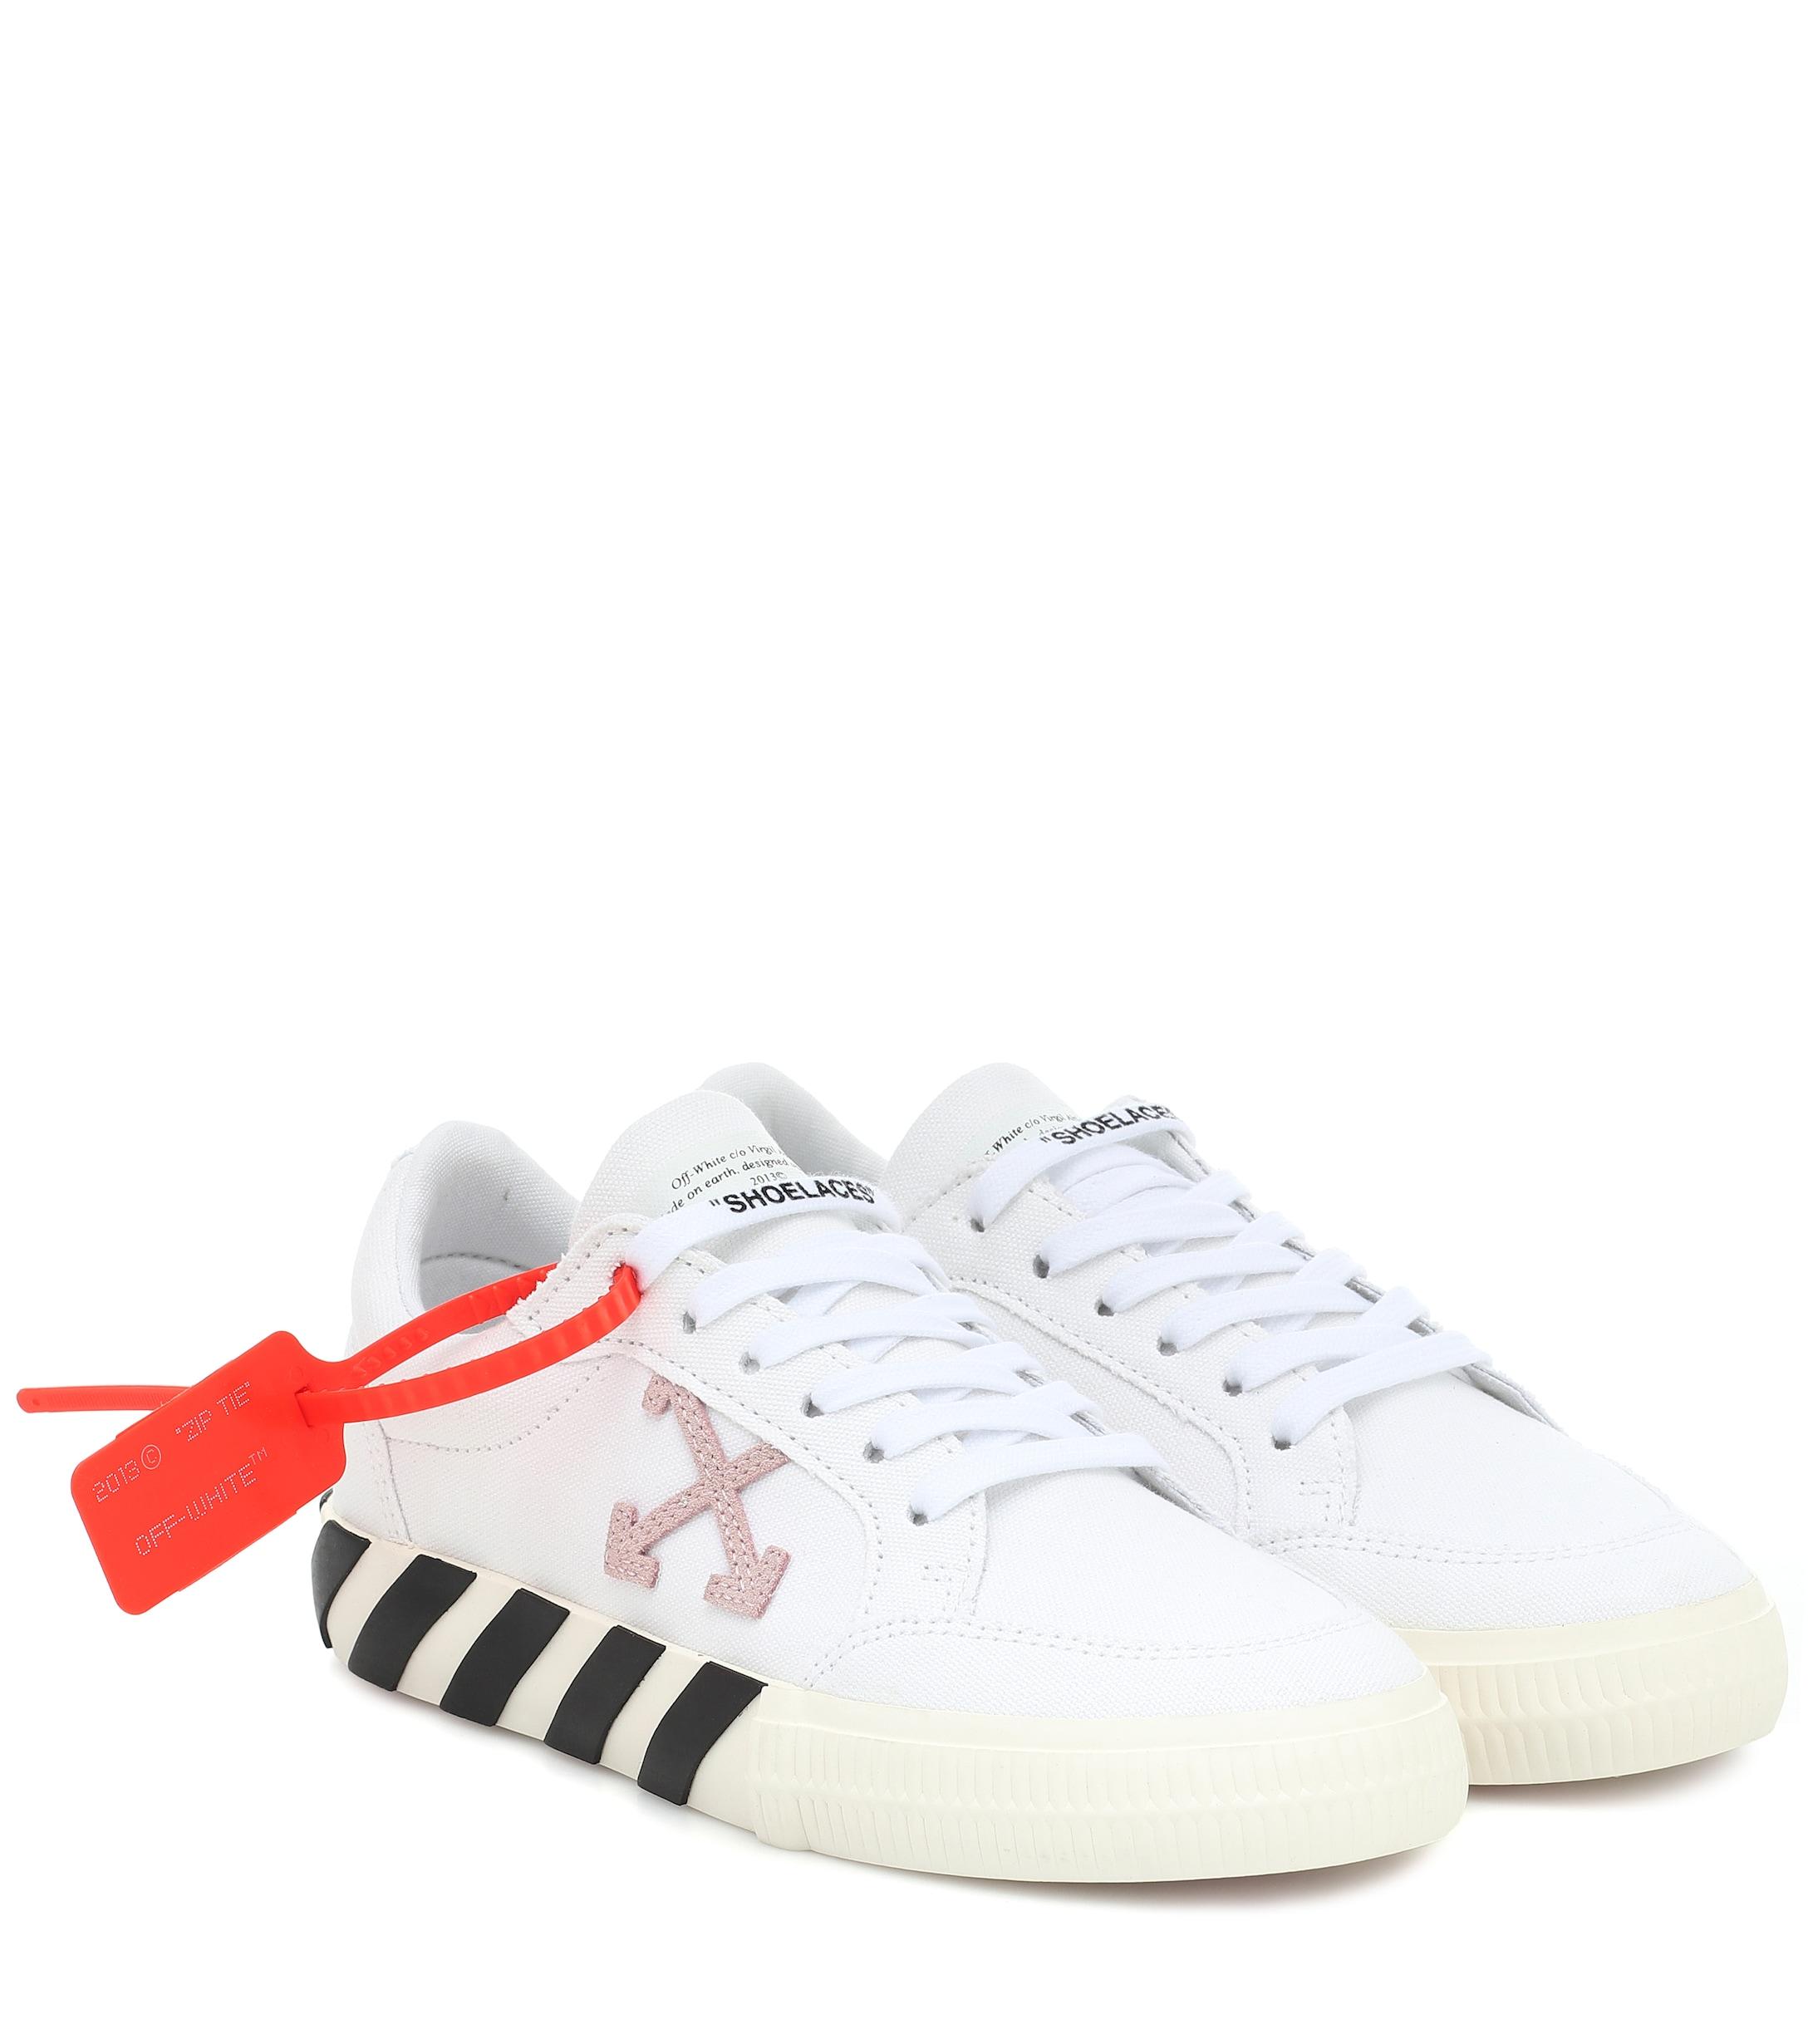 Off-White c/o Virgil Abloh Leather Exclusive To Mytheresa – Arrow 2.0 ...